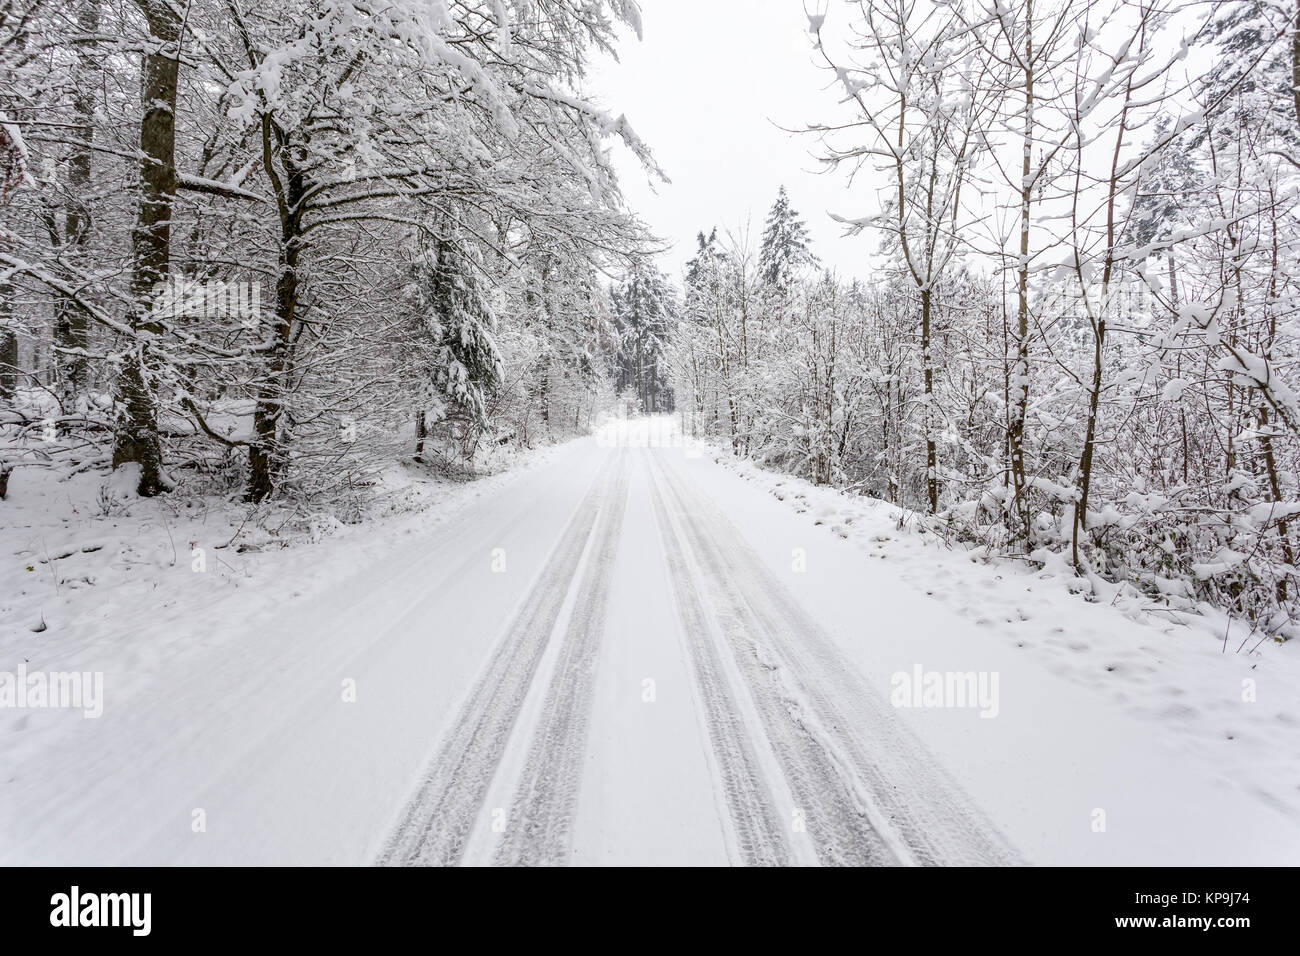 Snow covered road in a snowy white winter forest in Hesse, Germany Stock Photo